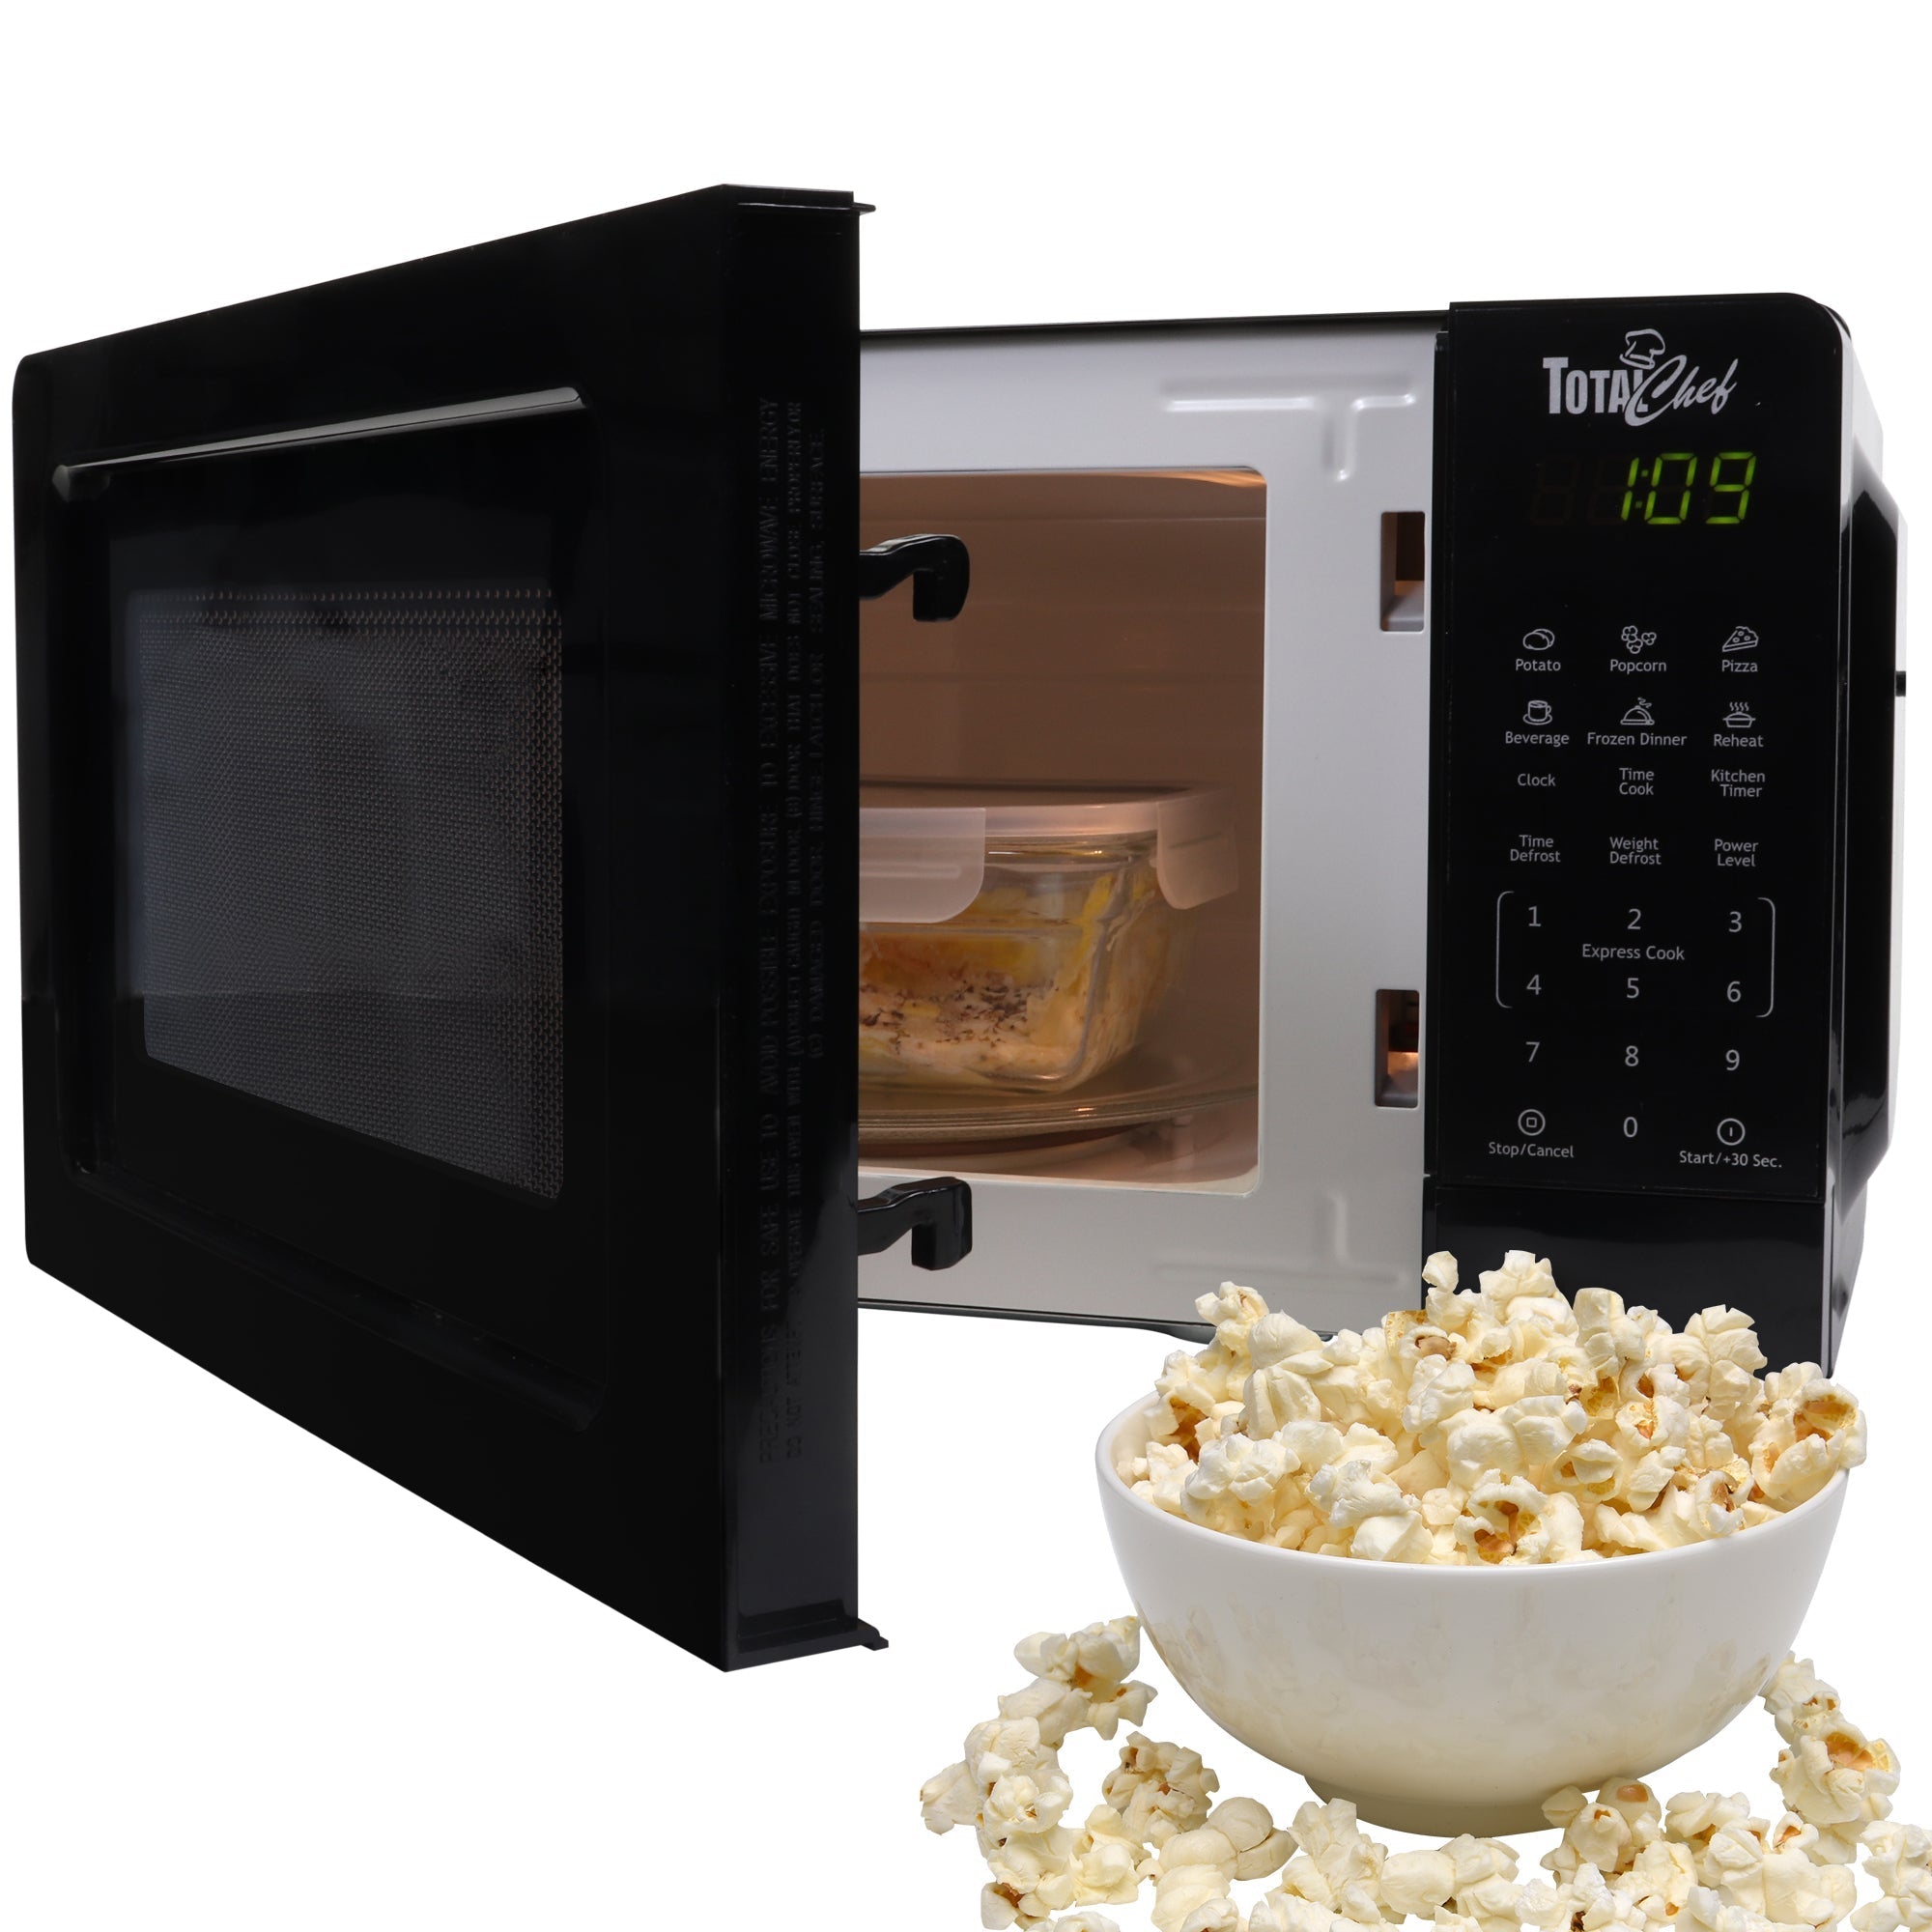 Product shot of black microwave on a white background with door partially open and a bowl of popcorn in front